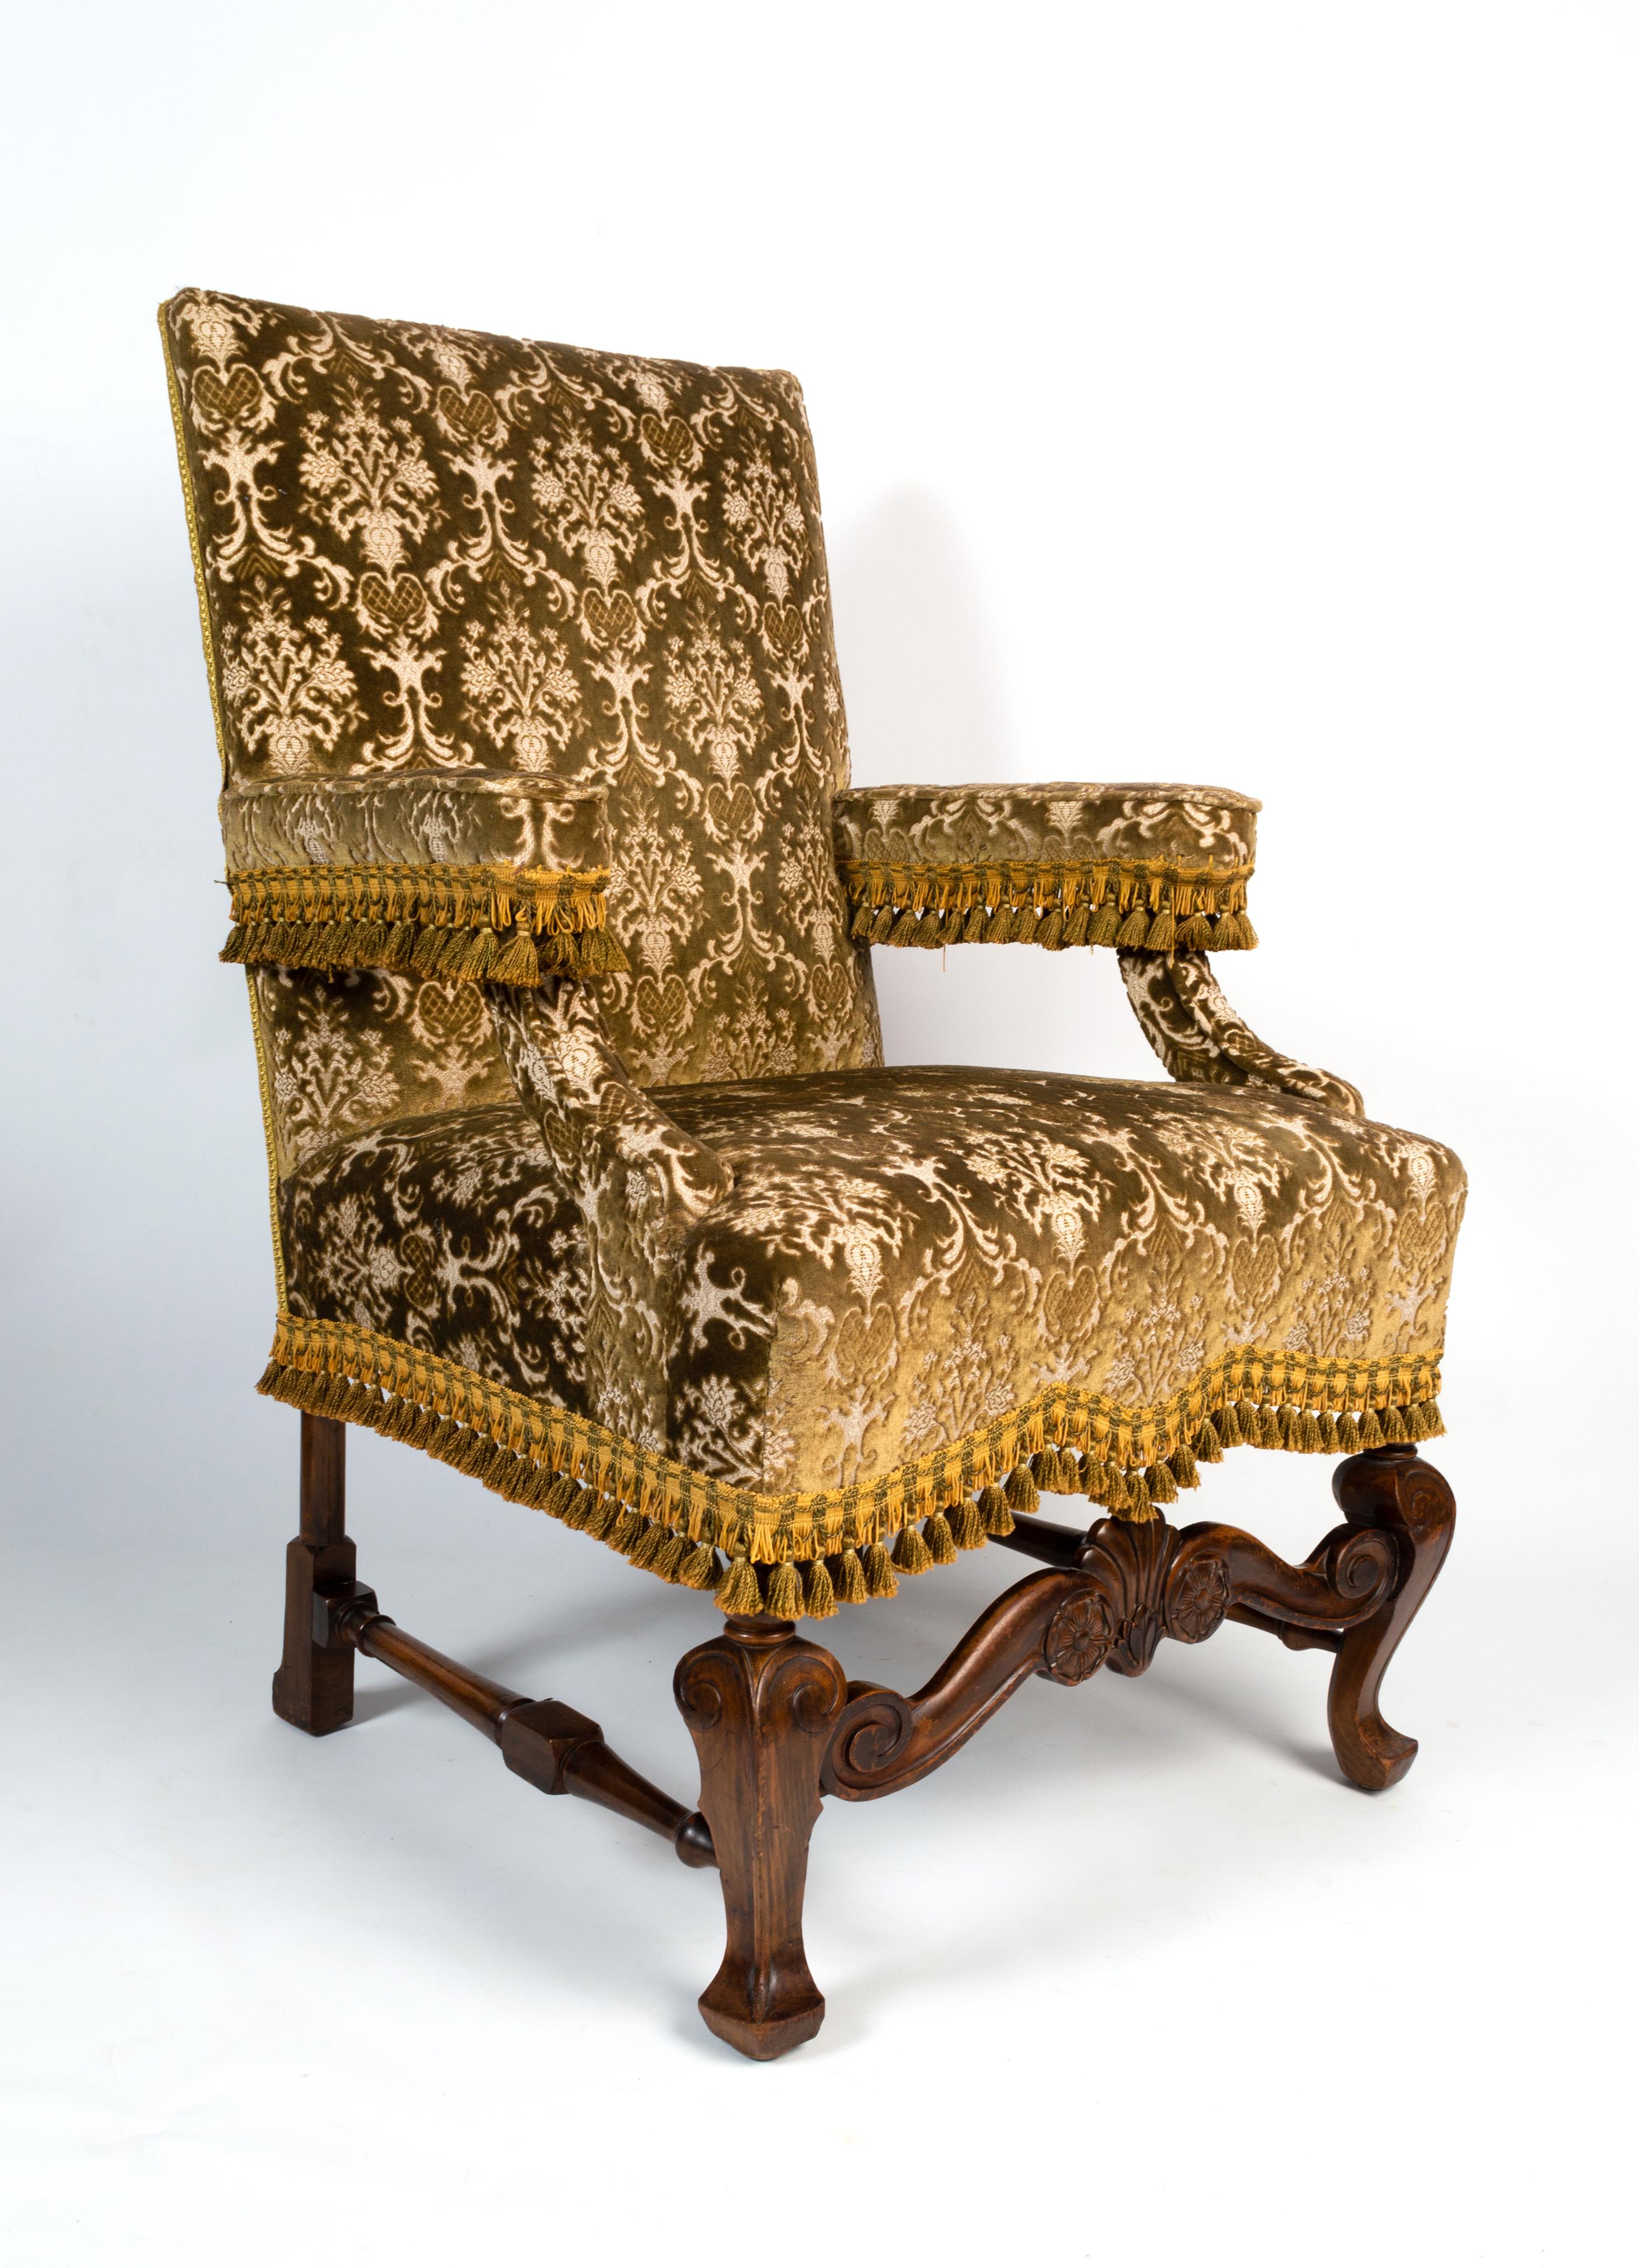 Antique English William and Mary Revival Elbow Chair Armchair 
Traditionally upholstered with tasselled fringe detailing.
In very good condition commensurate of age.